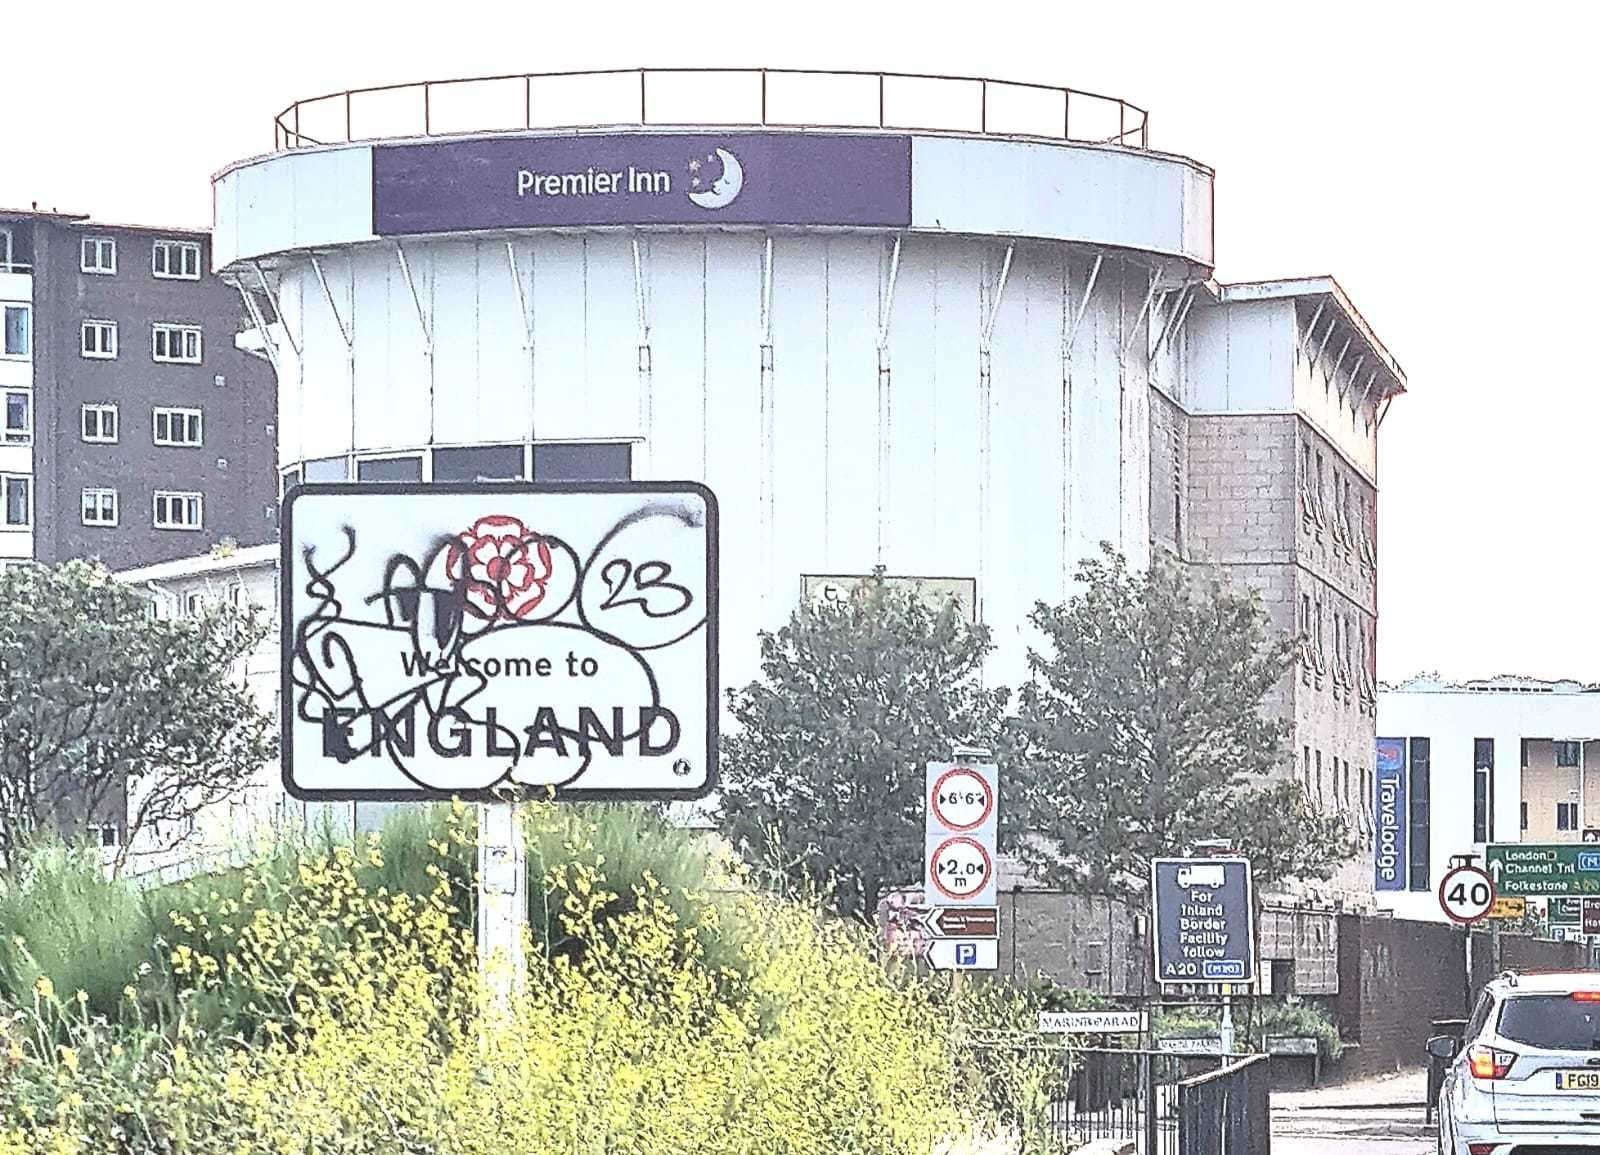 A sign welcoming travellers to England has been covered in graffiti along the A20 in Dover. Picture: Sean Irwin